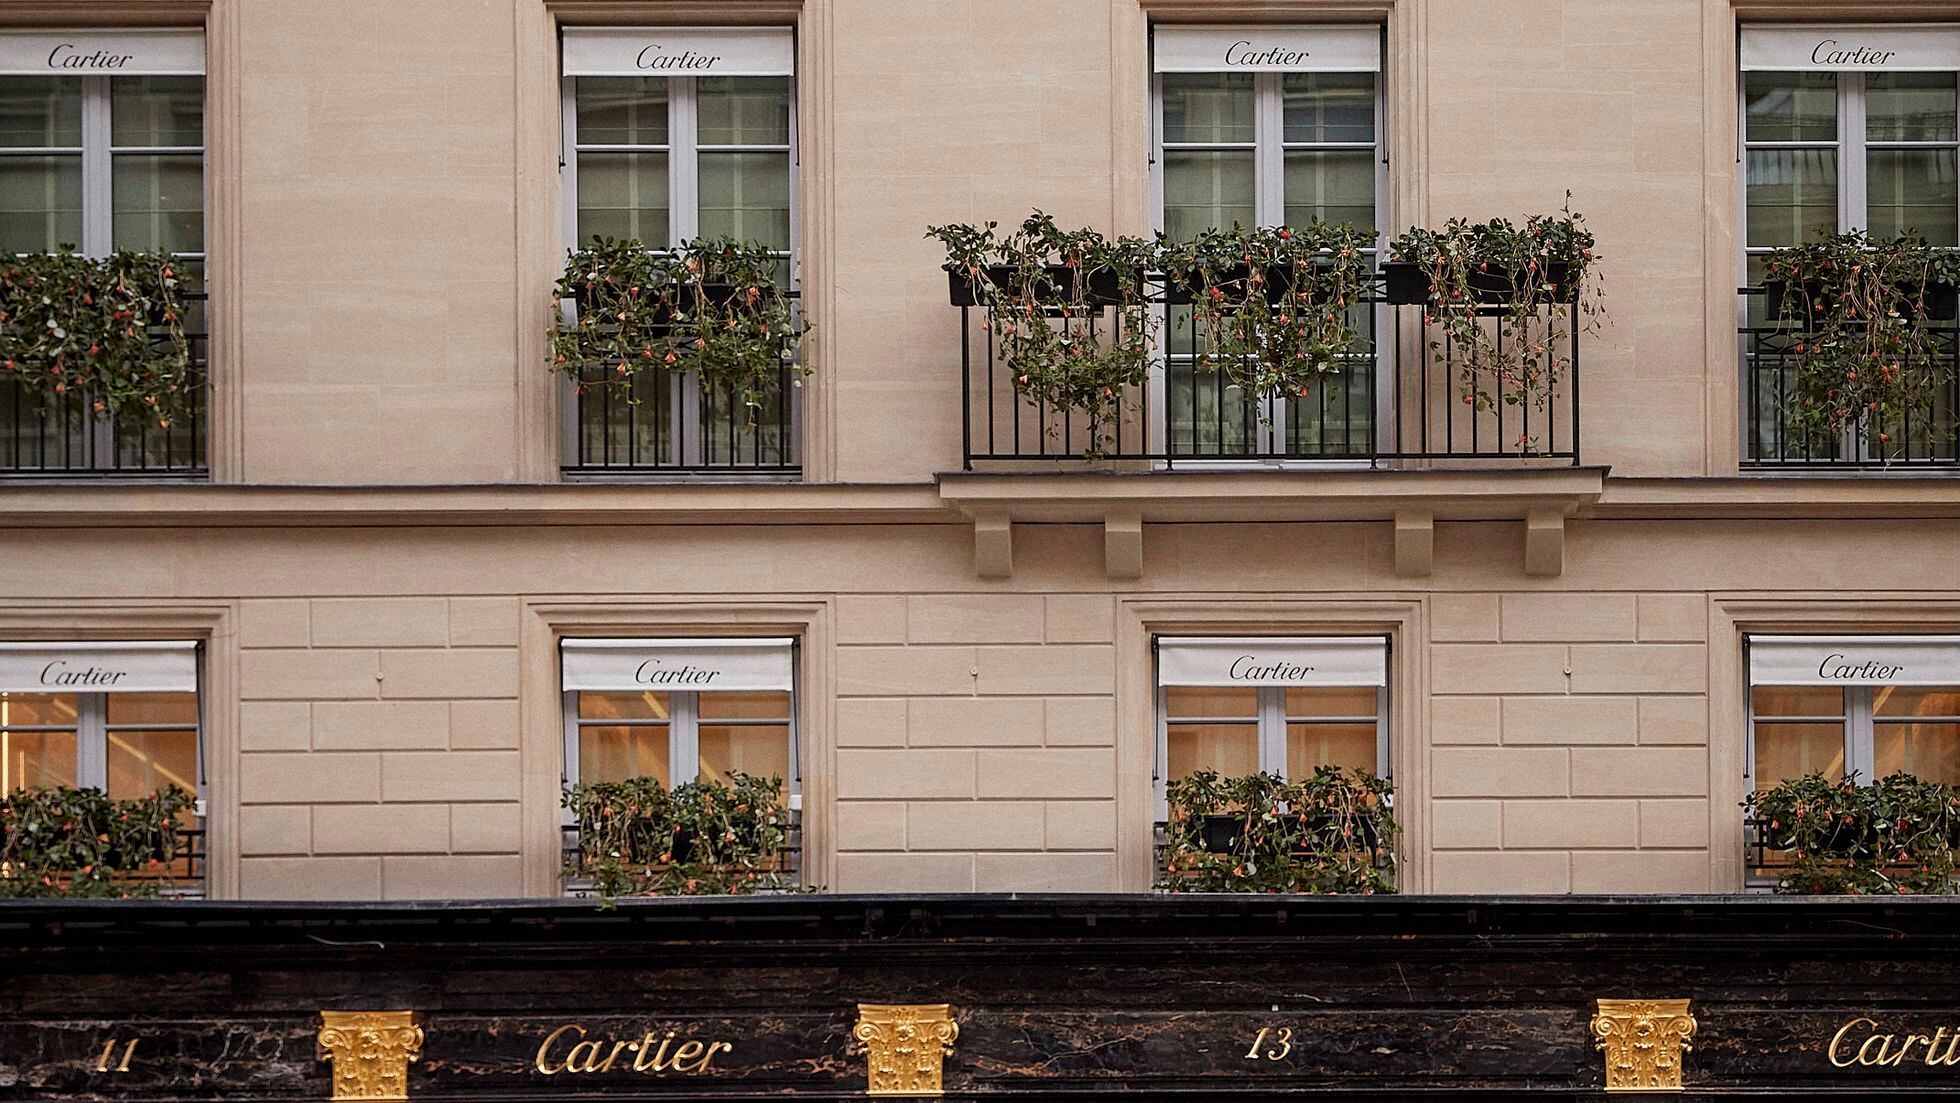 Paris is still the luxury capital of the world, Economy and Business